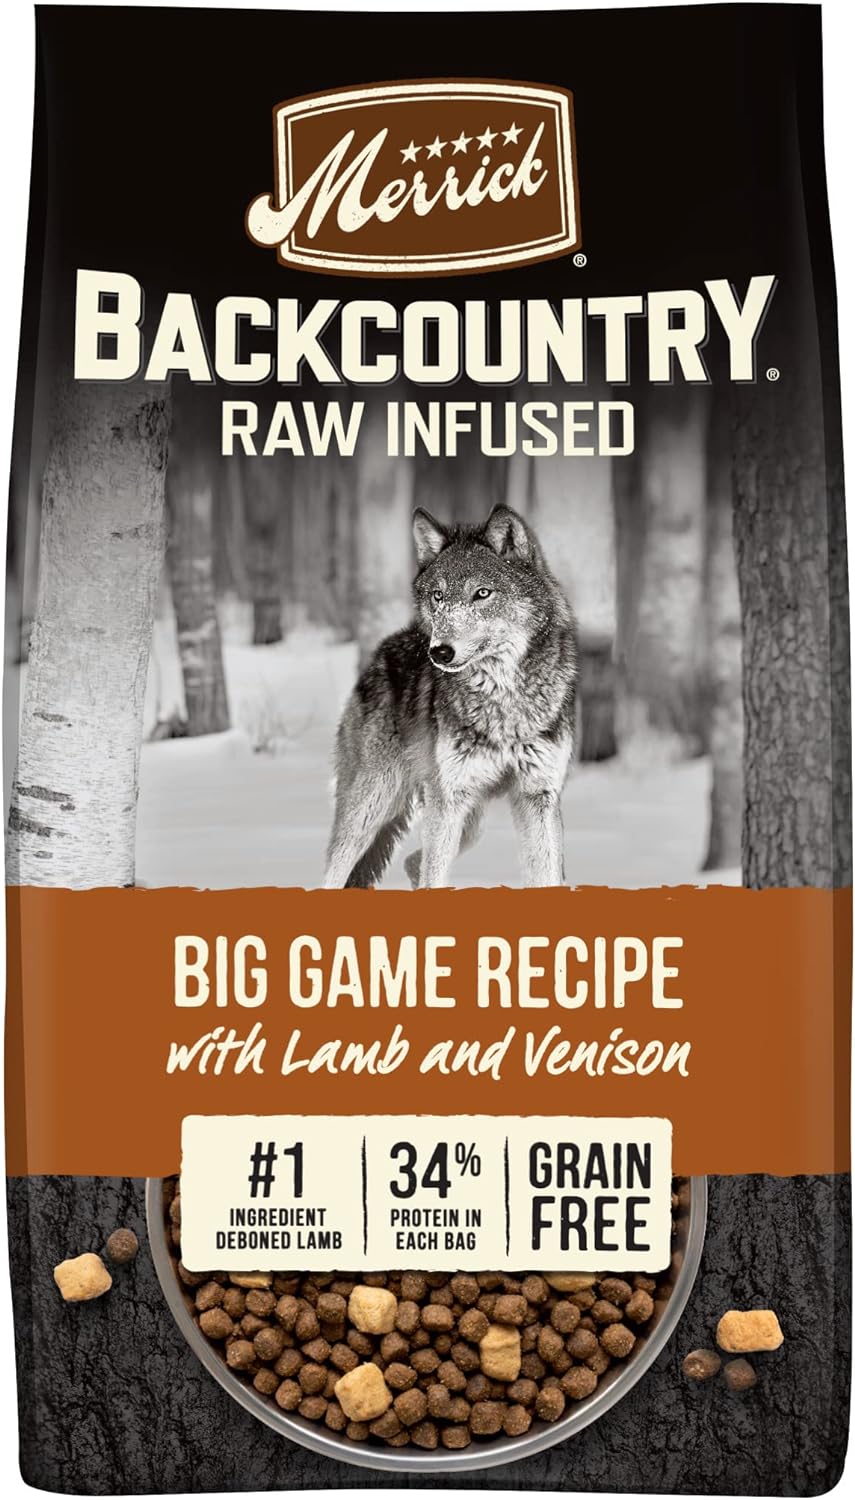 Merrick Backcountry Raw Infused Big Game Recipe Dry Dog Food – Gallery Image 1